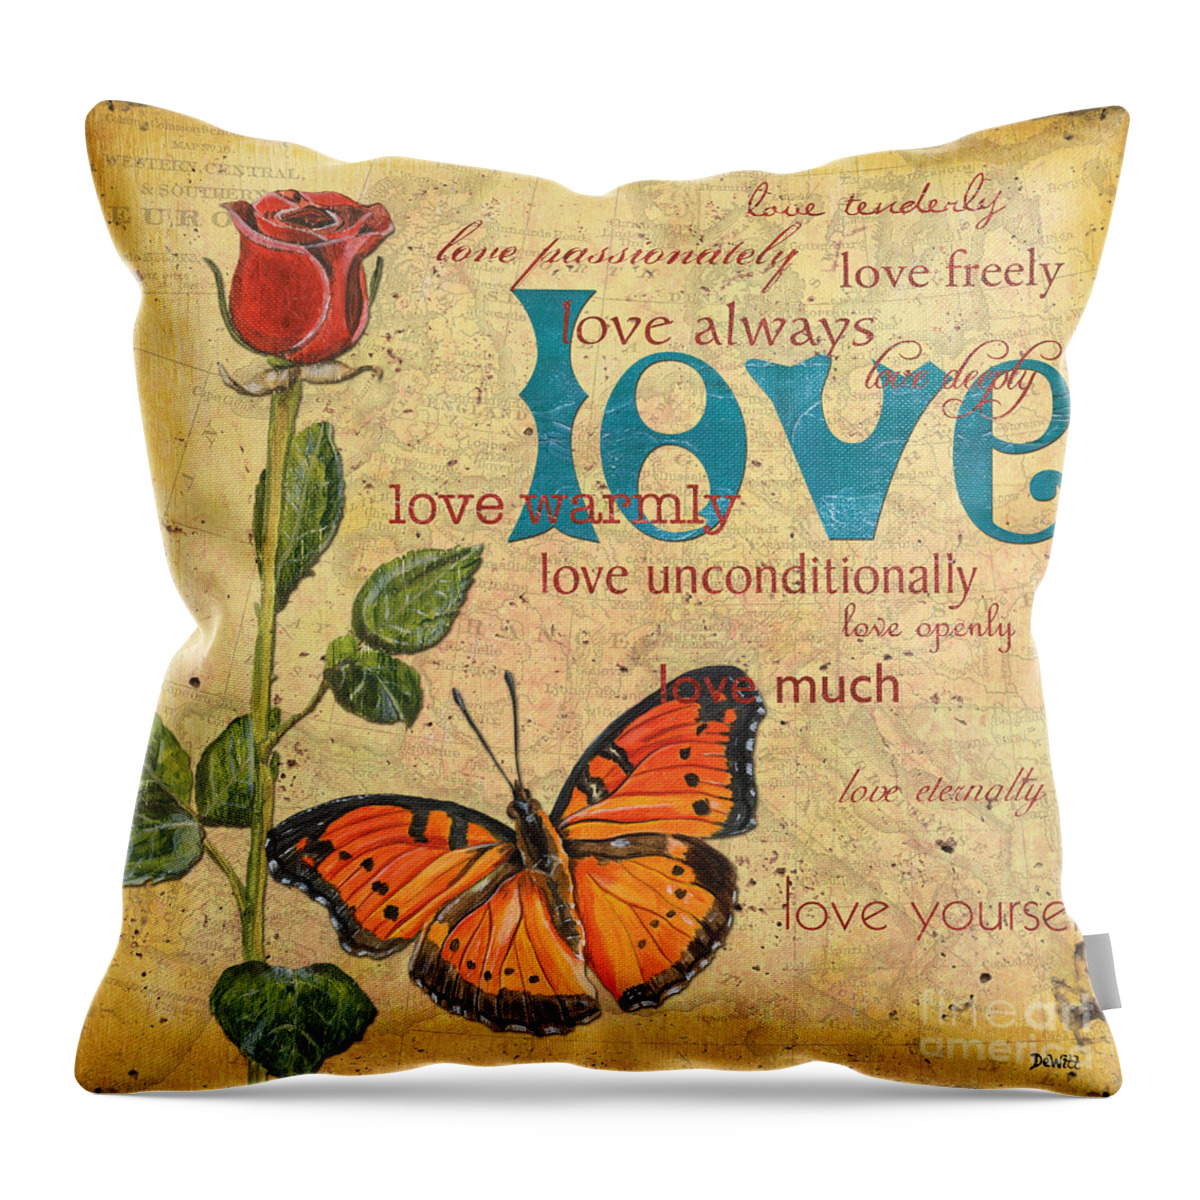 Inspirational Throw Pillow featuring the mixed media Roses and Butterflies 2 by Debbie DeWitt